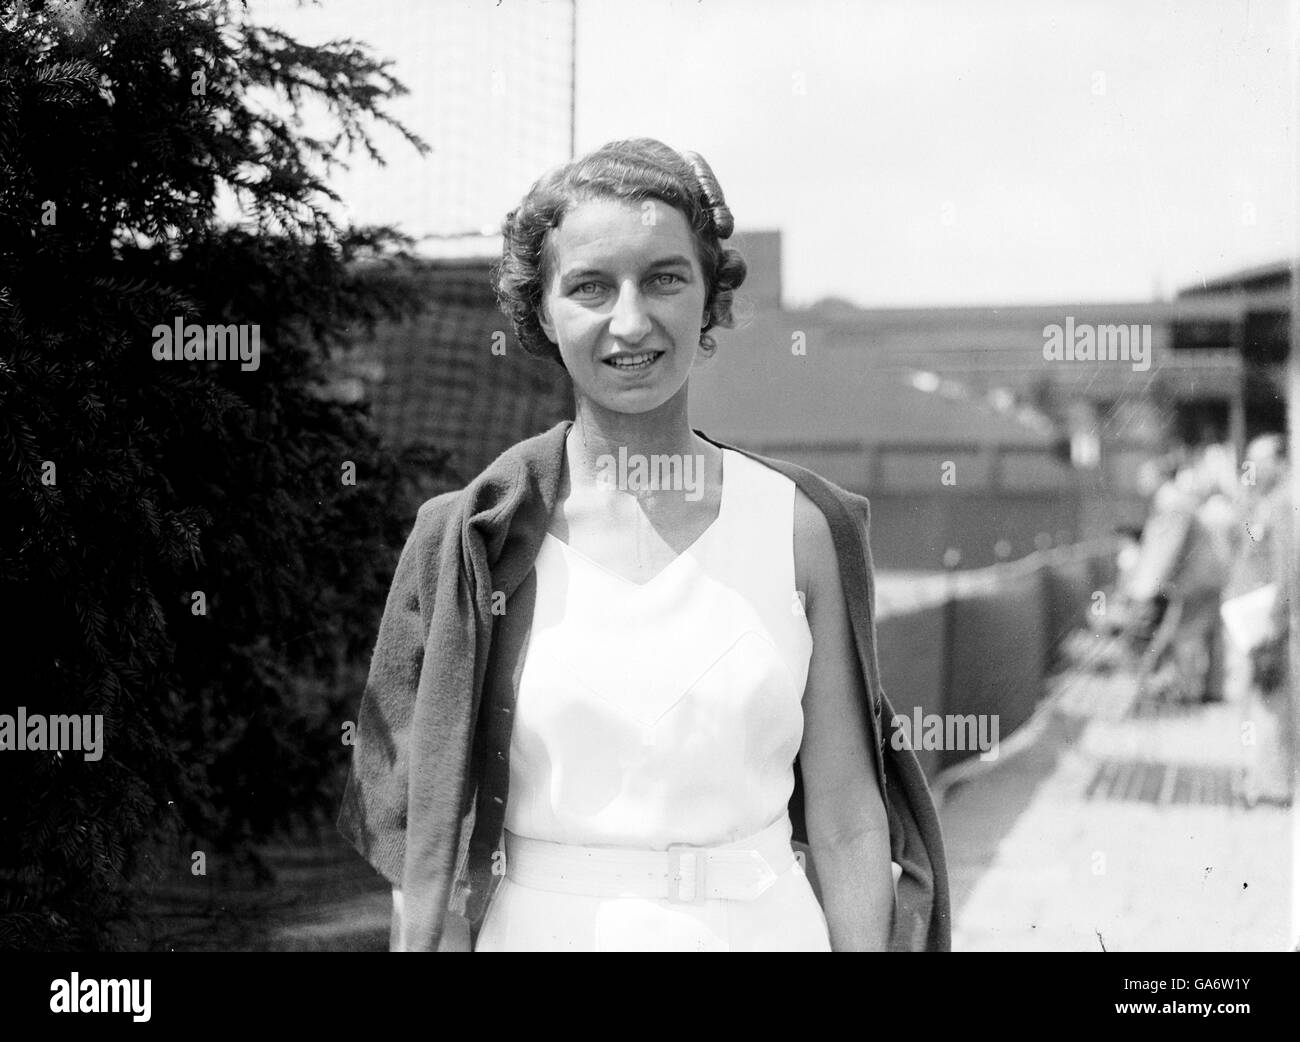 Tennis - Mary Hare (née Hardwick).Mary Hare (née Hardwick) Banque D'Images